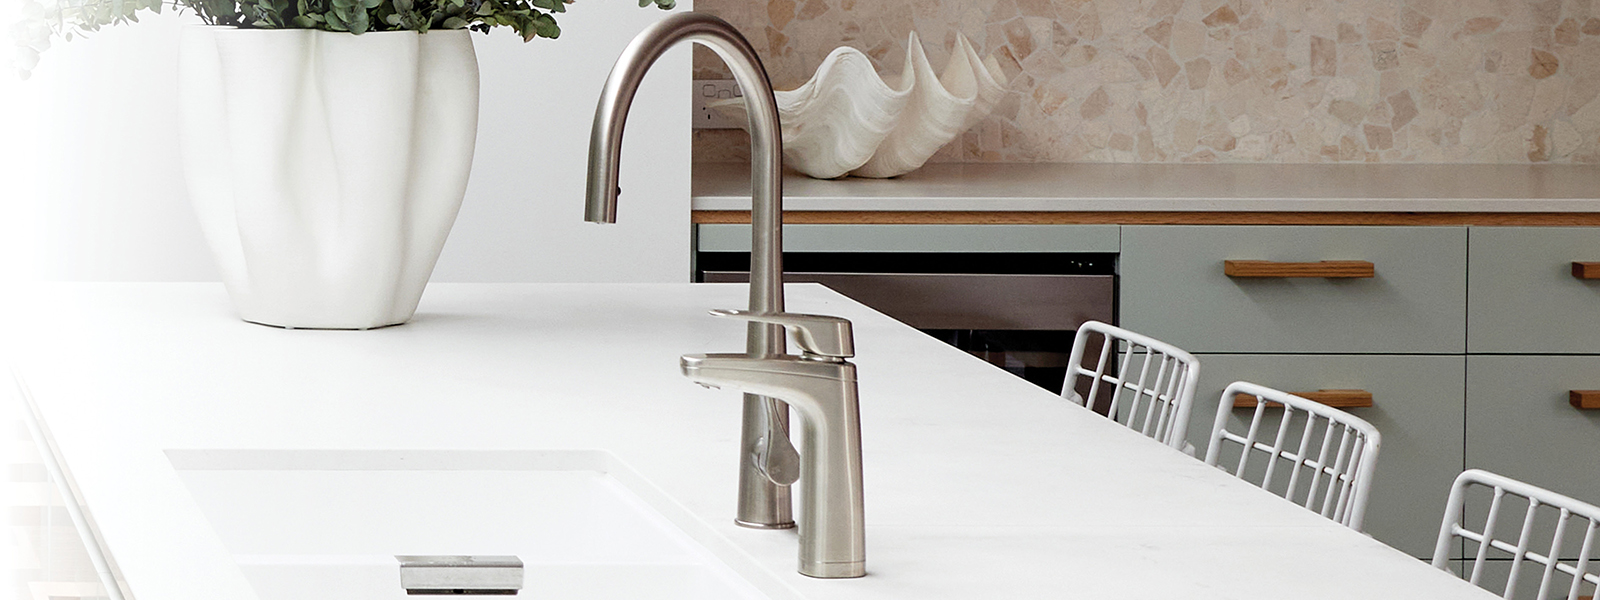 Free Standard Installation Valued Up To $449* with Selected Billi Taps at Hart & Co